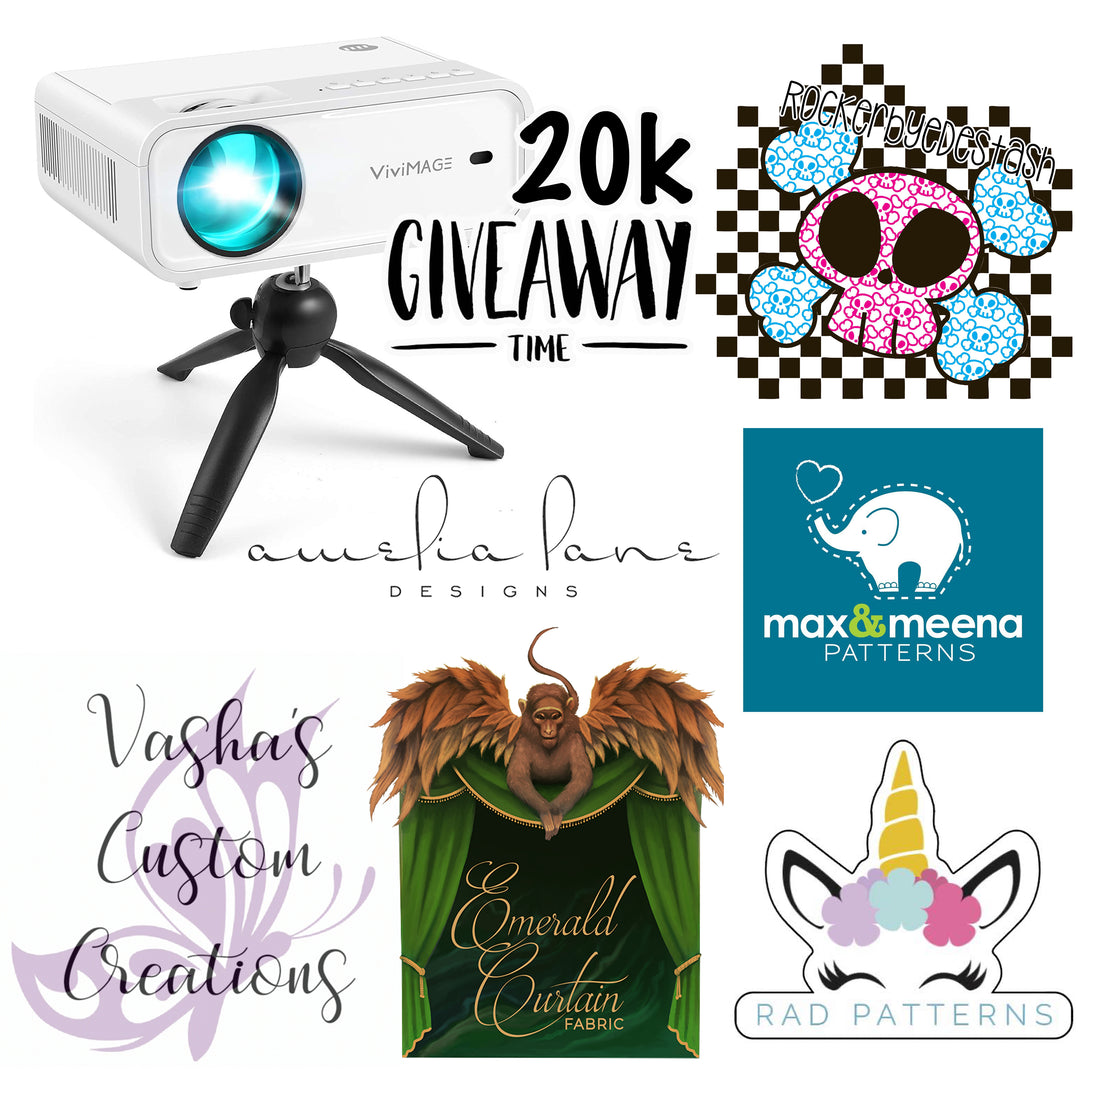 20k members celebration and giveaway!